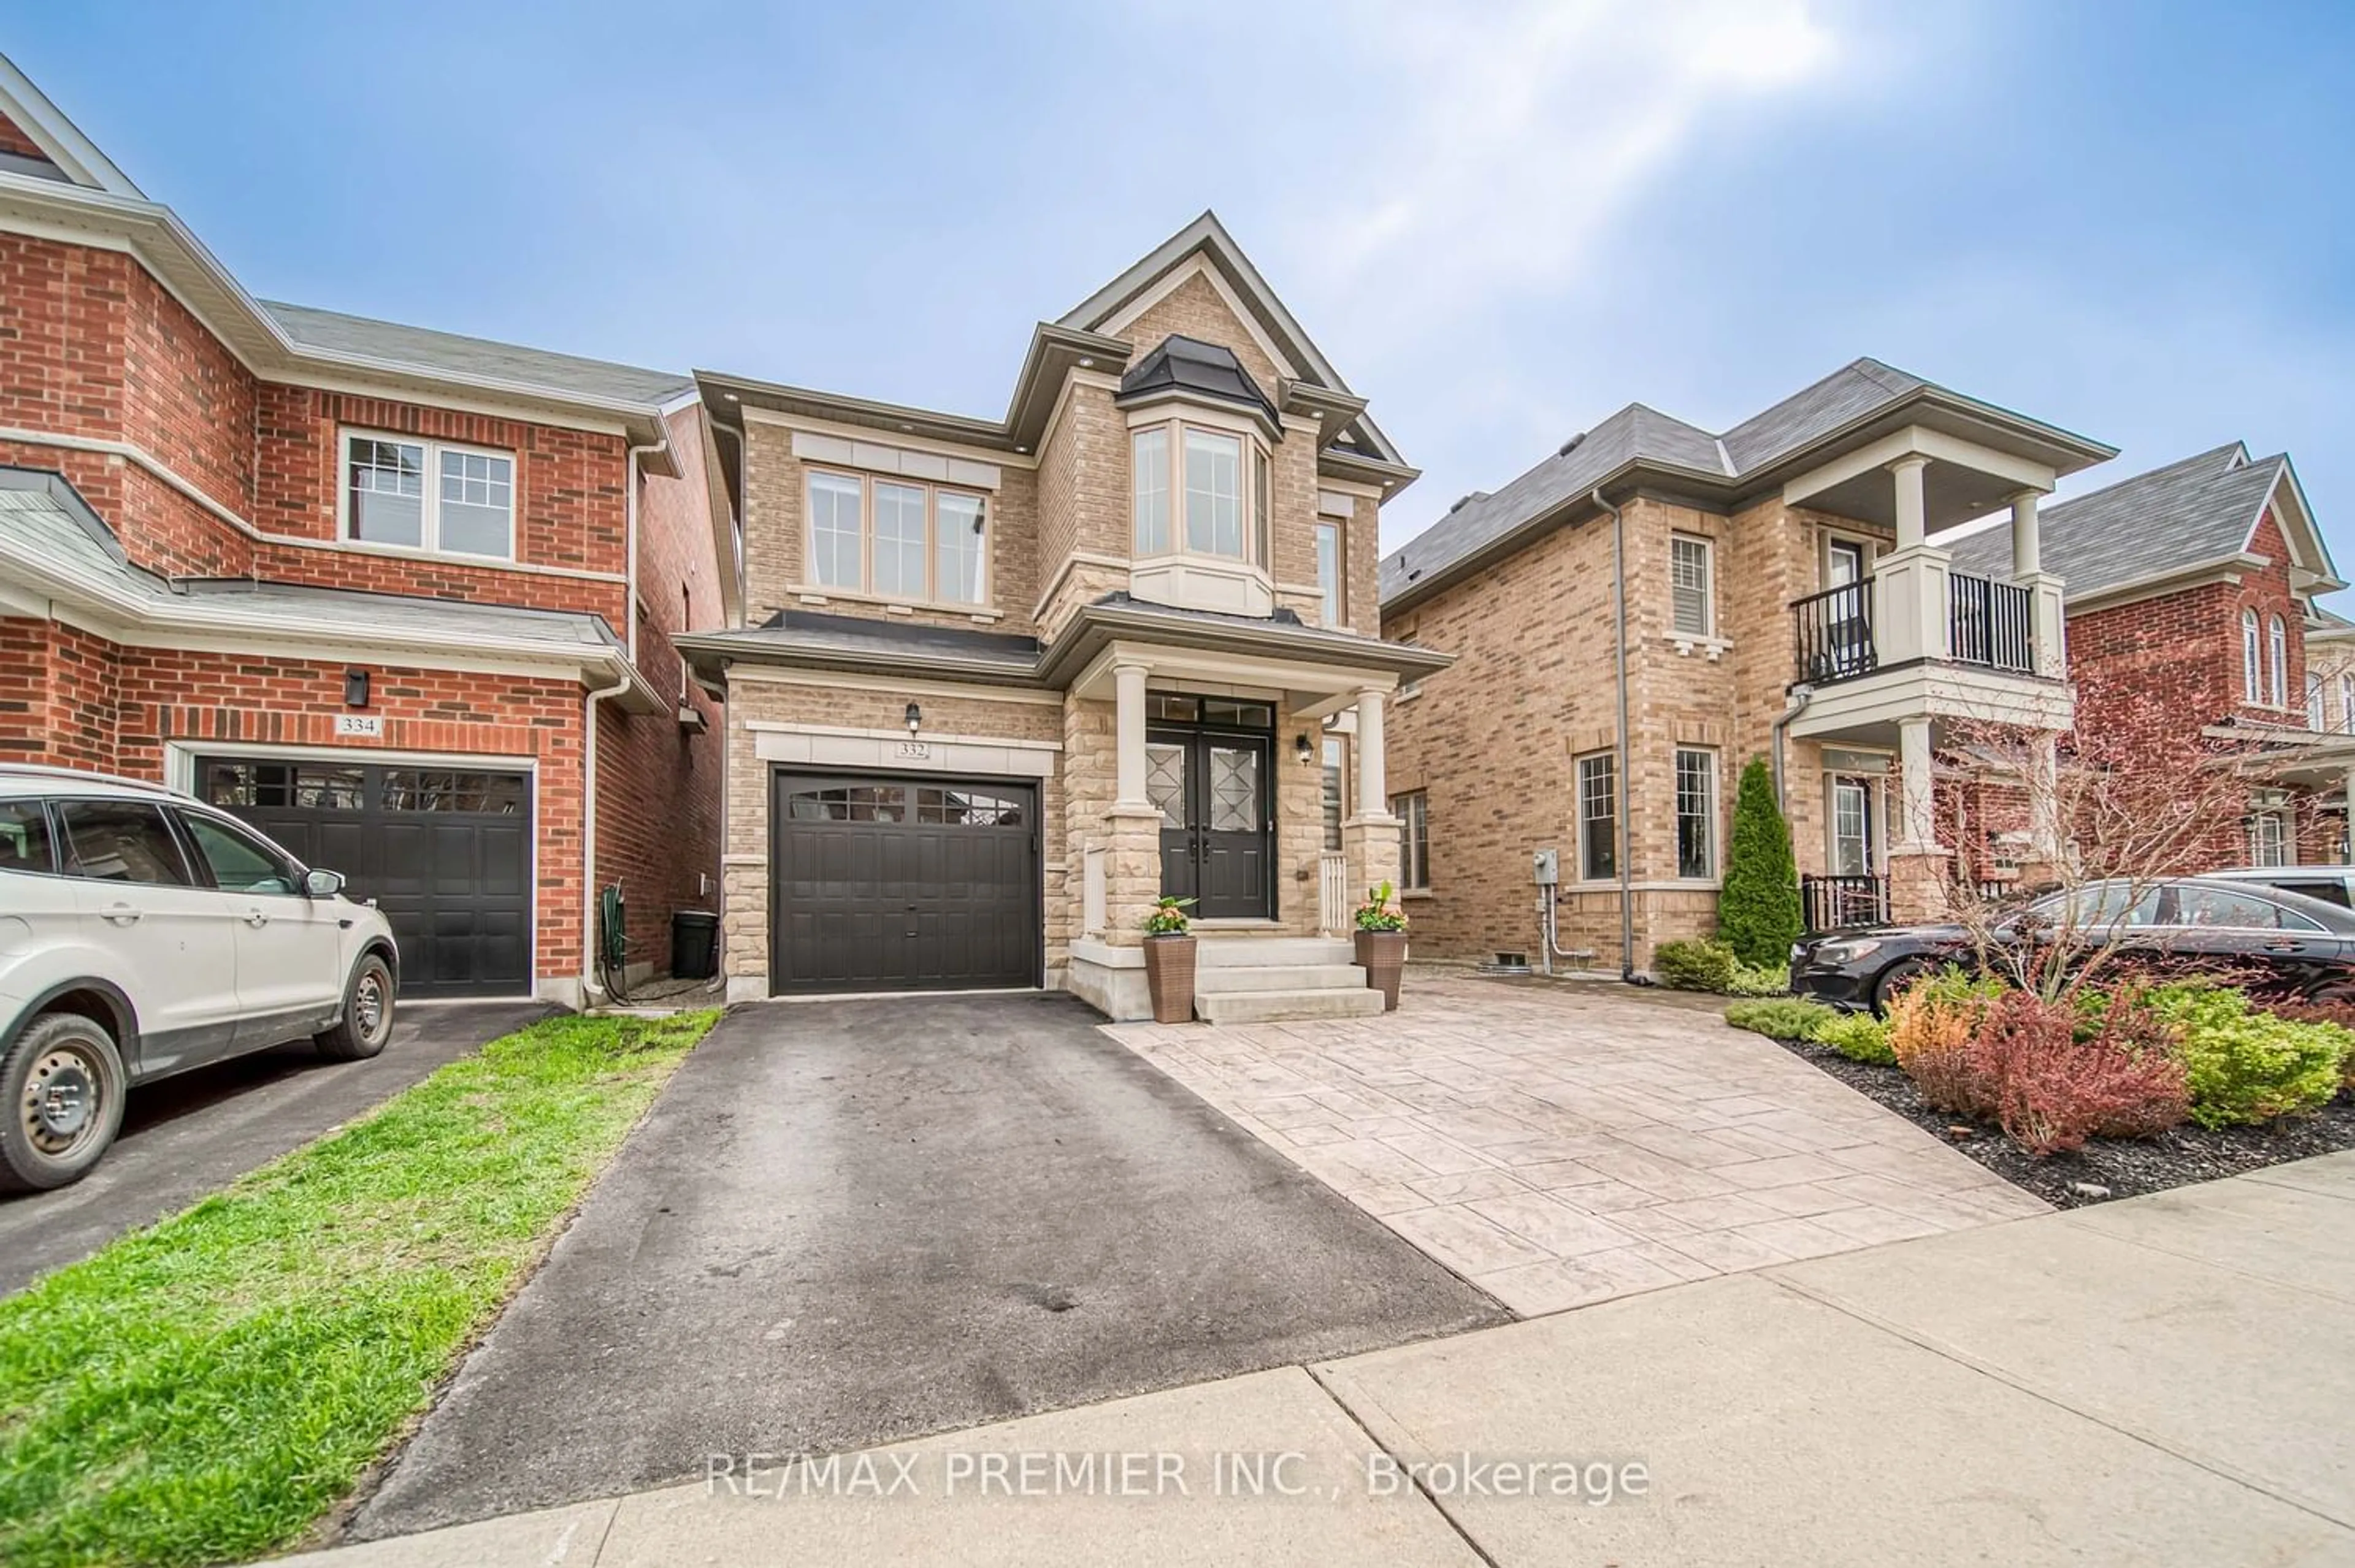 Home with brick exterior material for 332 Moody Dr, Vaughan Ontario L4H 3N5